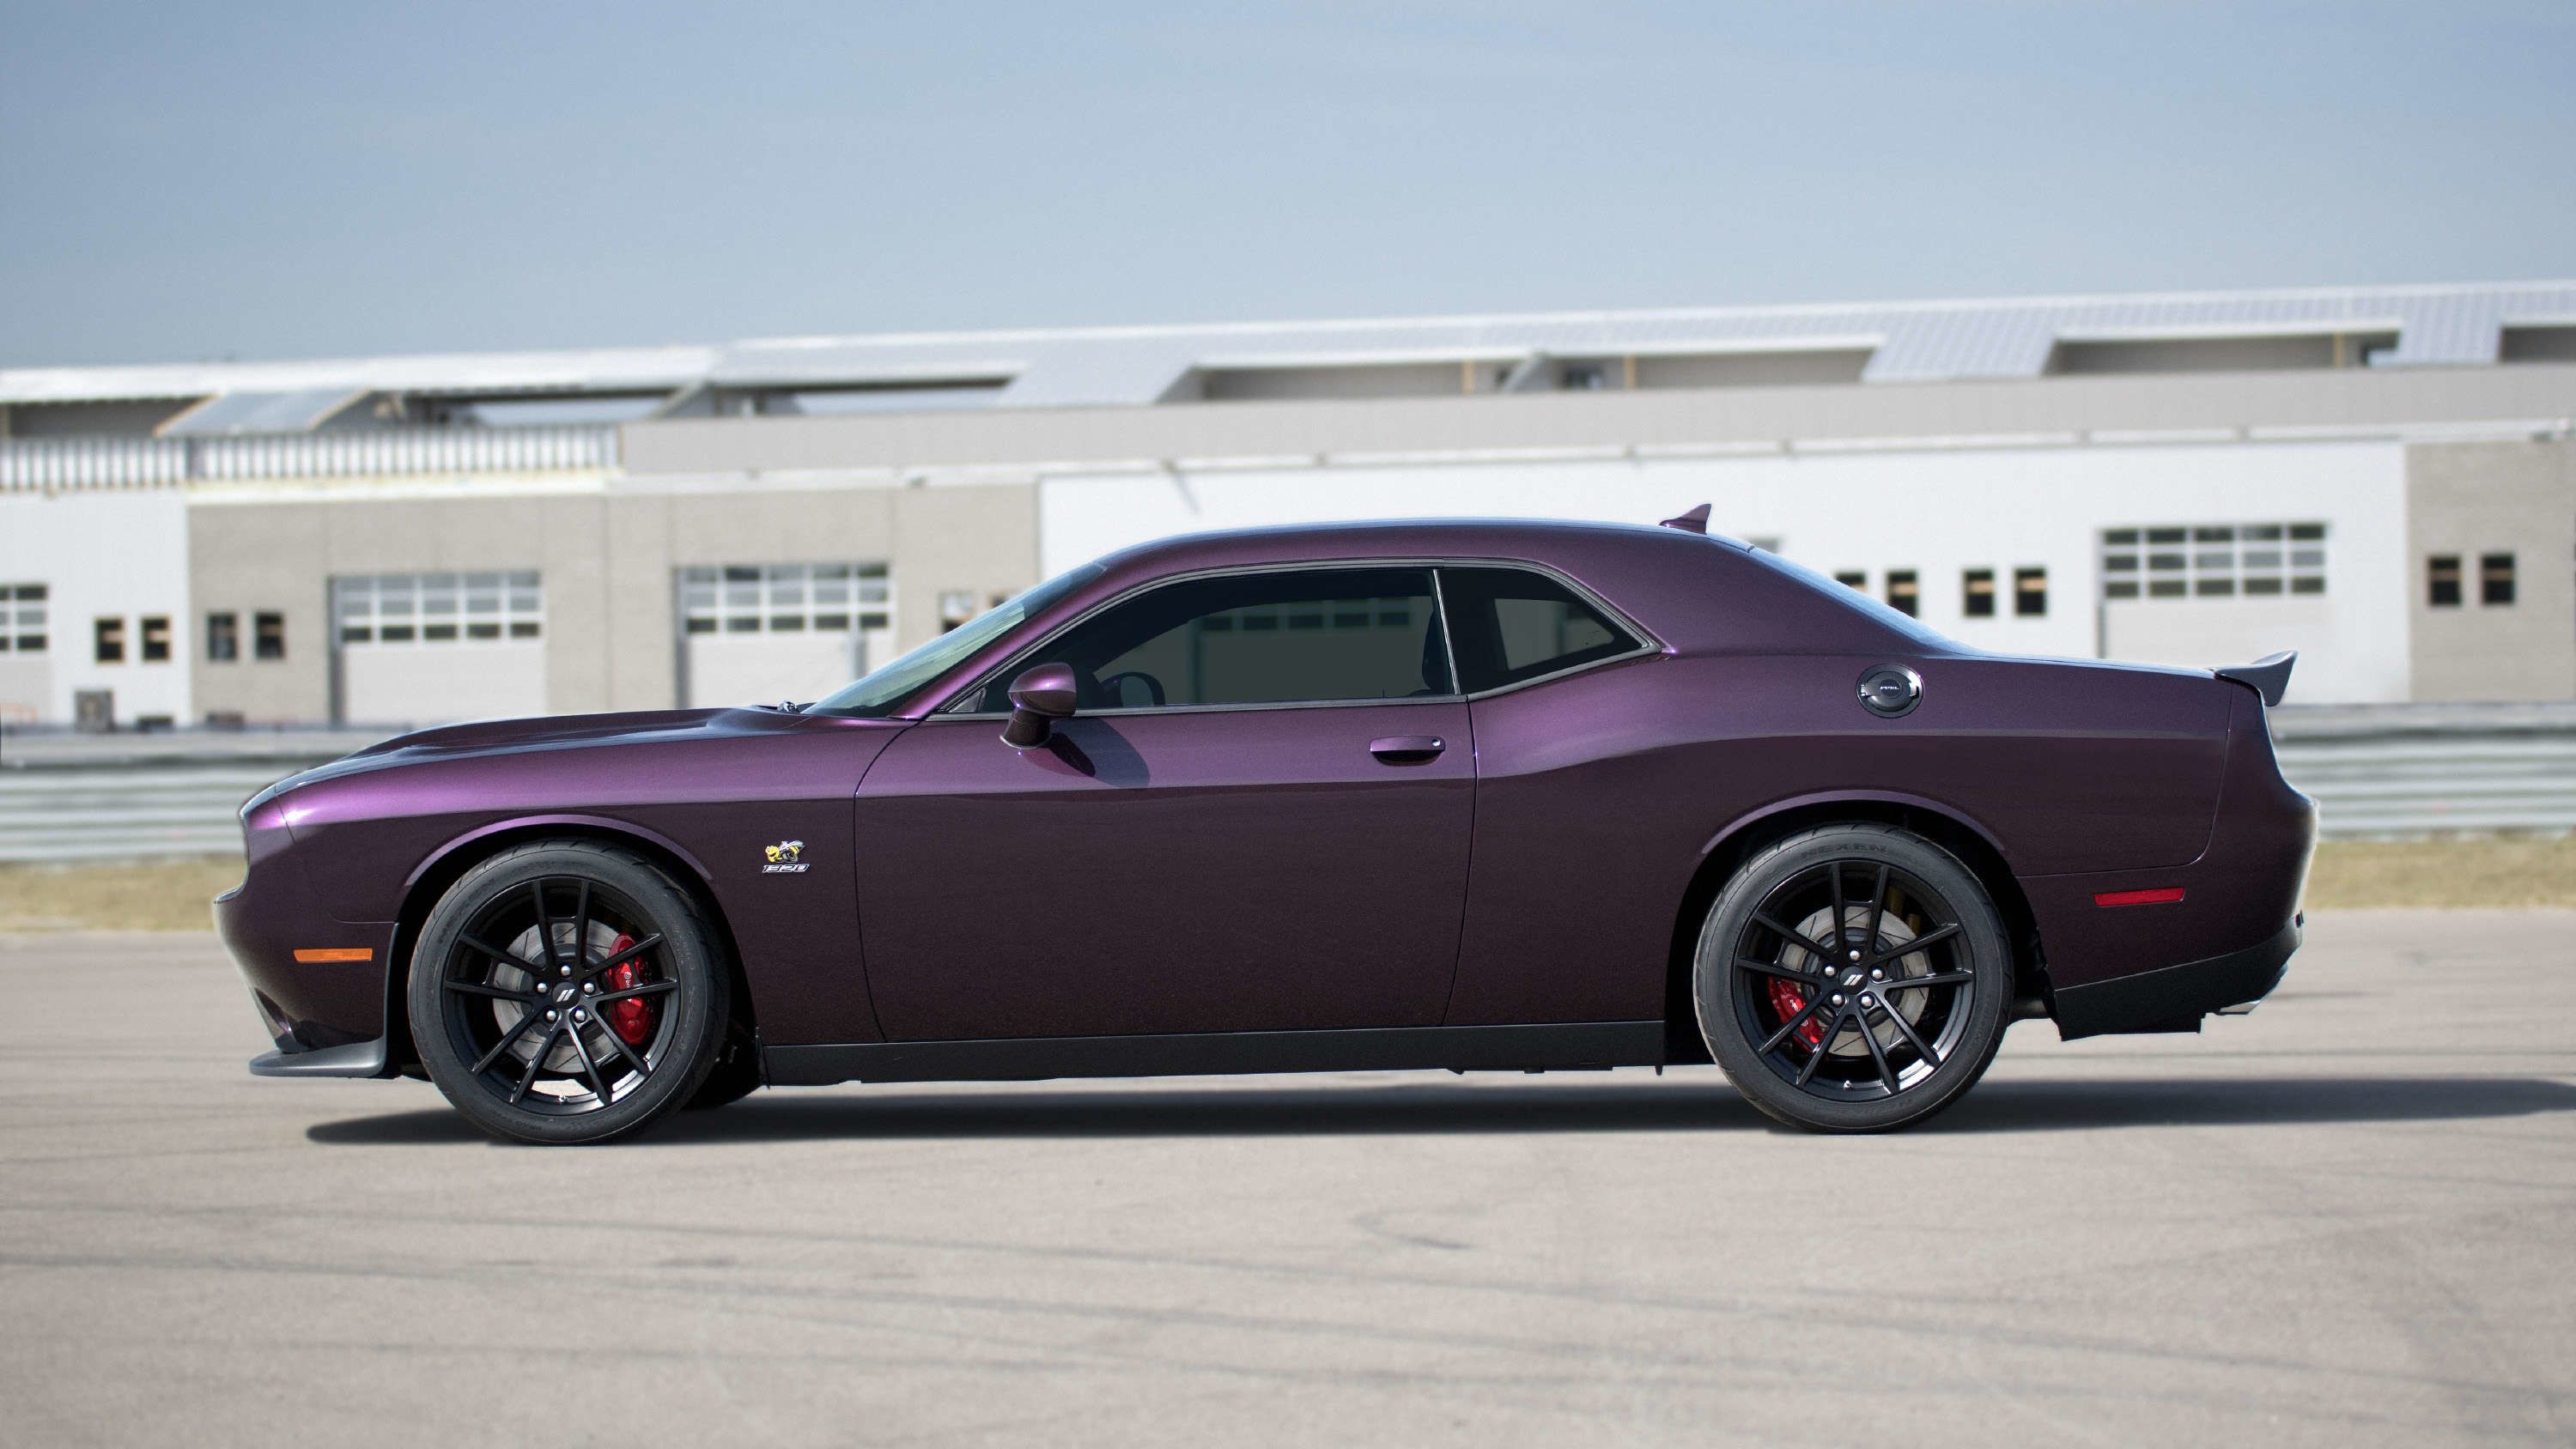 Dodge Challenger Review. Price, specs, features and photo